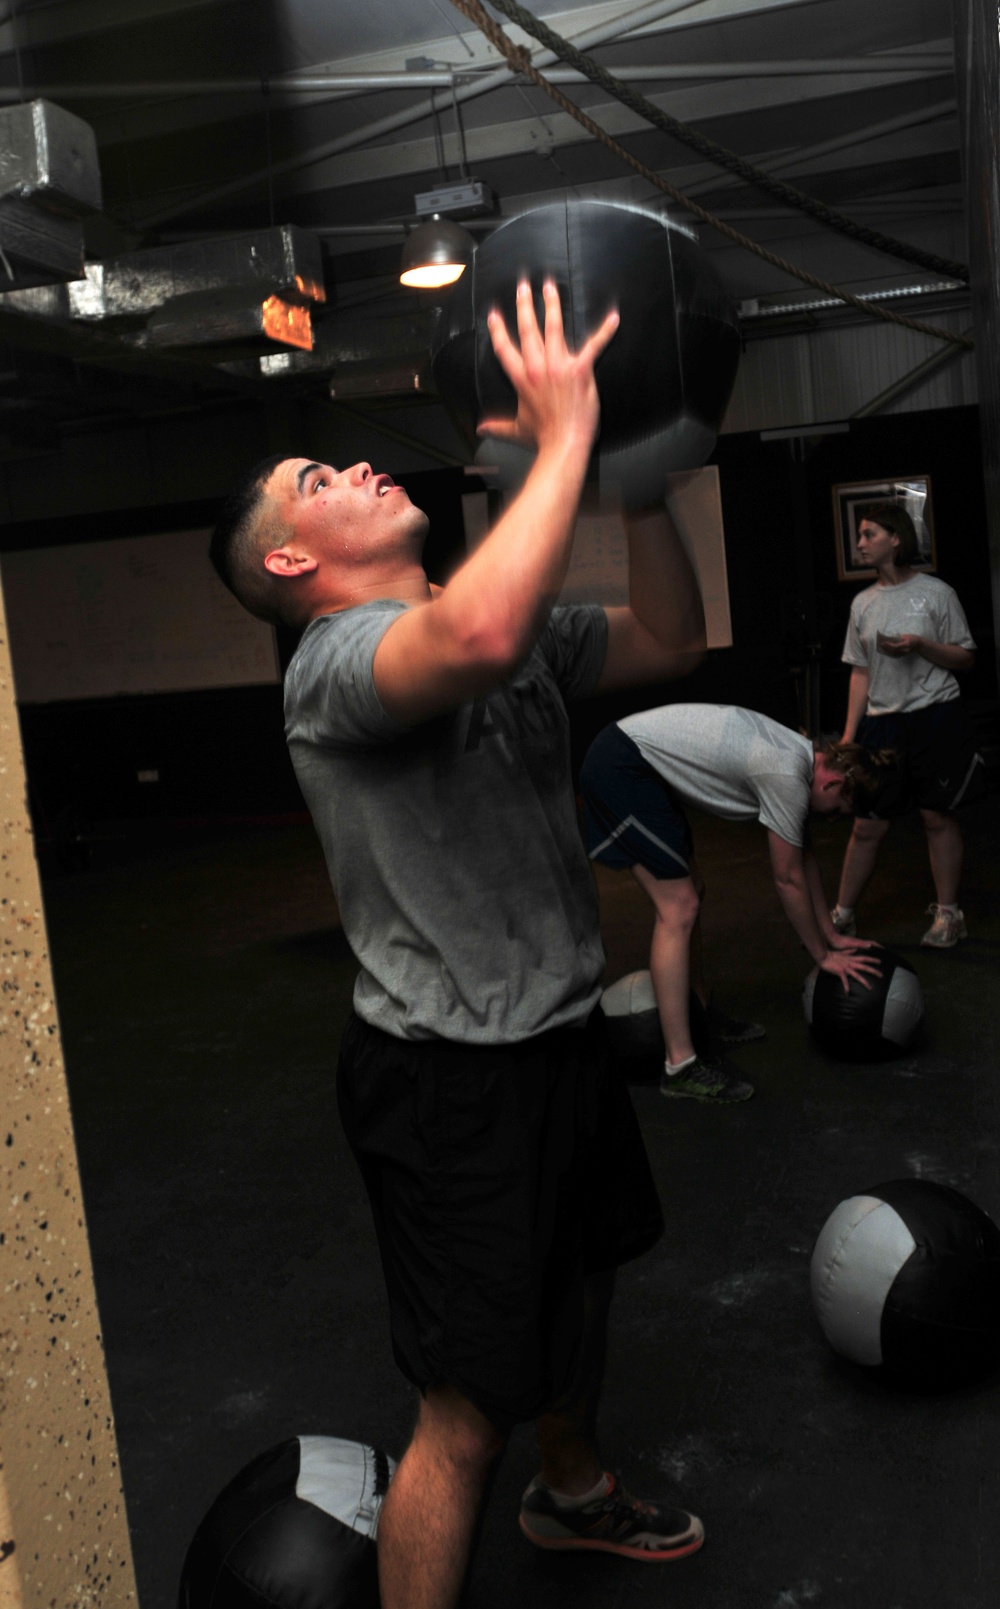 Soldier tosses a medicine ball while working out